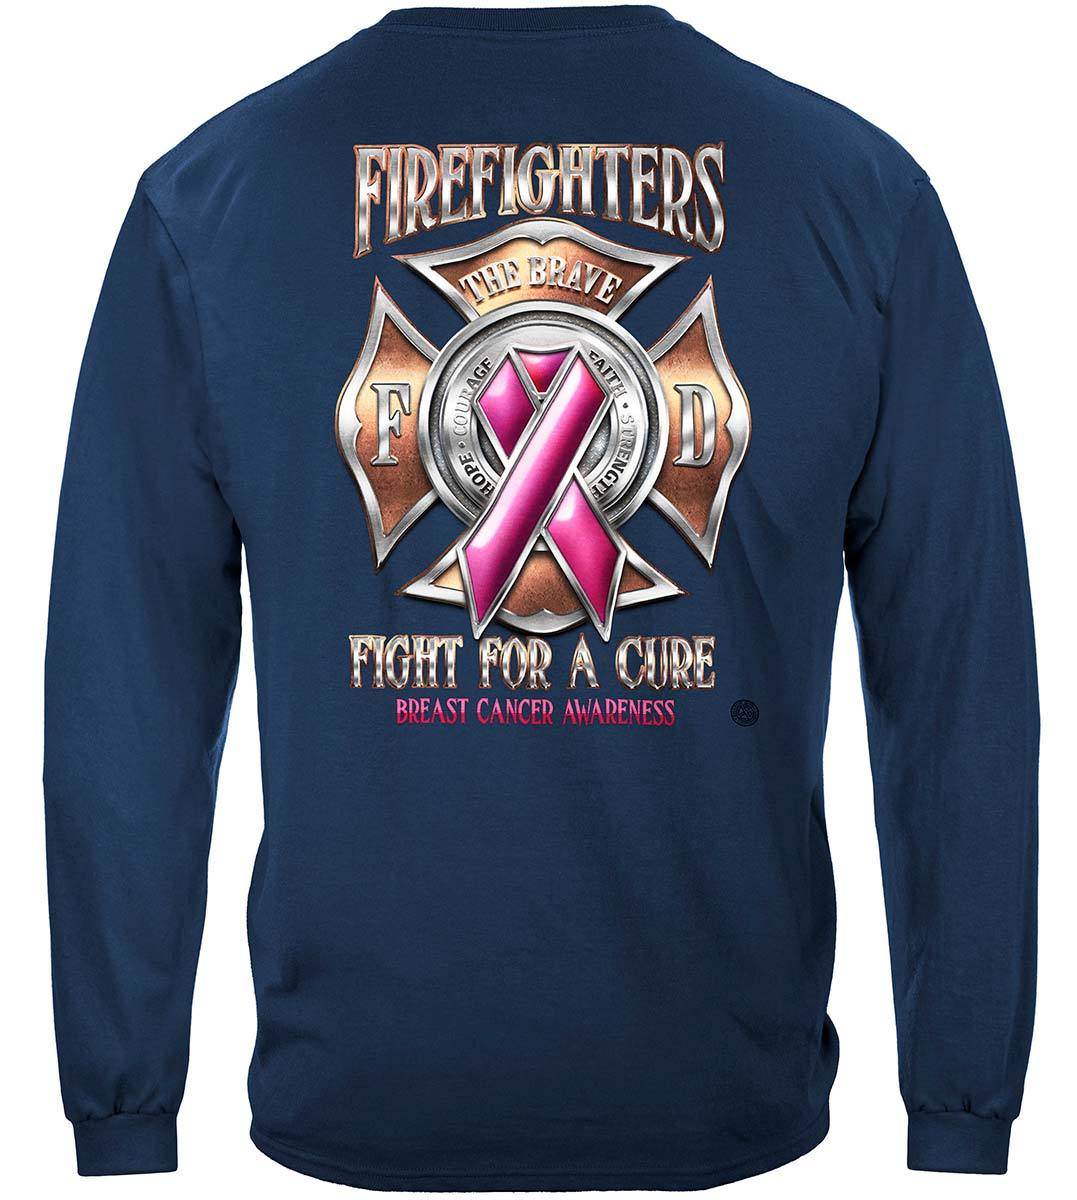 Firefighter Race For A Cure Premium Long Sleeves